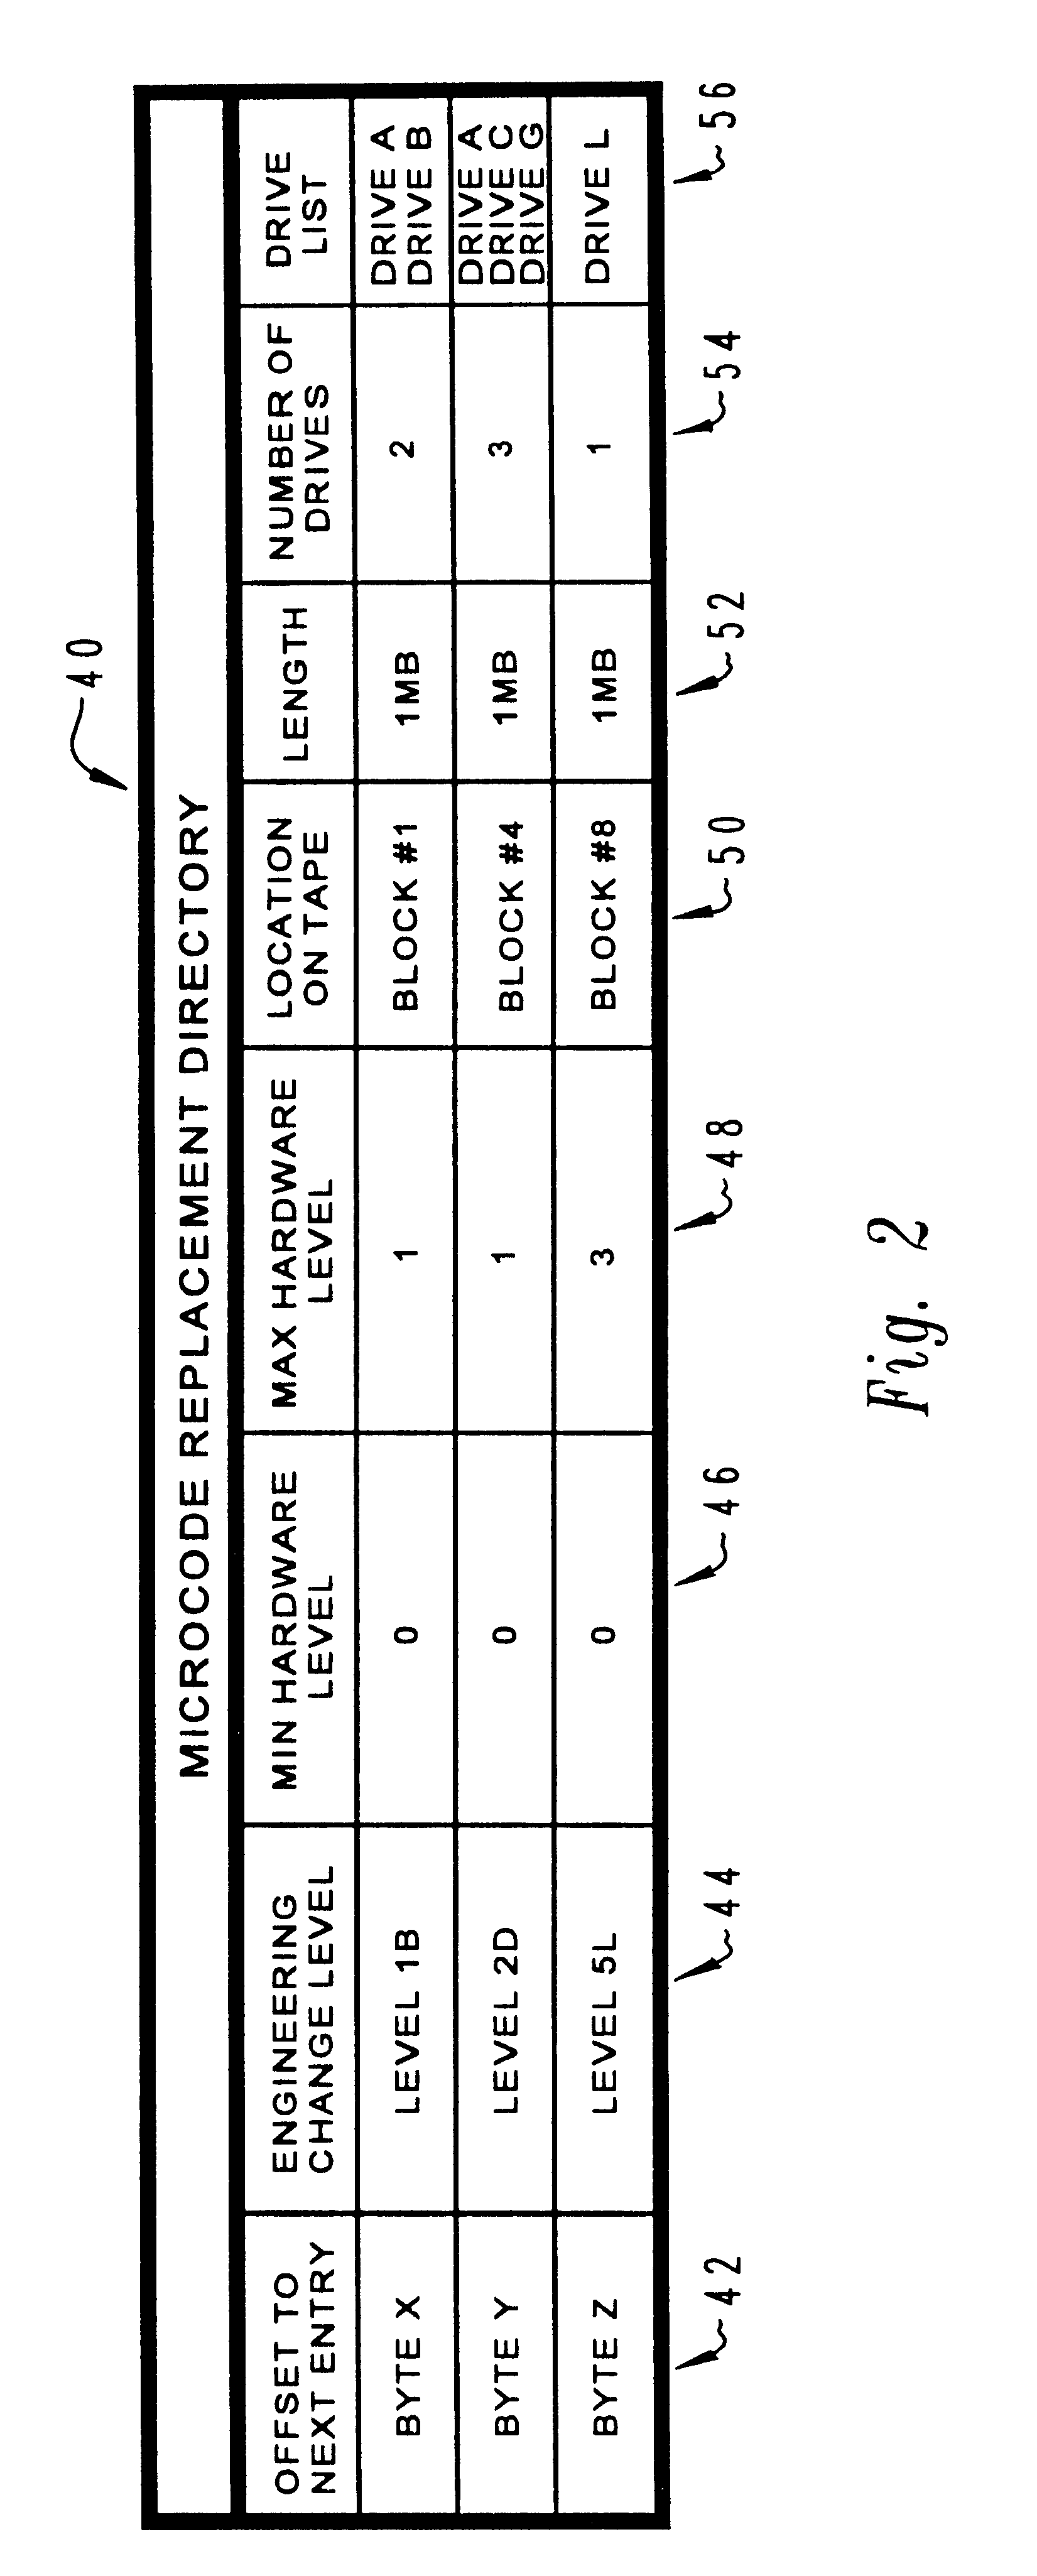 Method and system for reversible installation of software applications in a data processing system utilizing an automated archival process